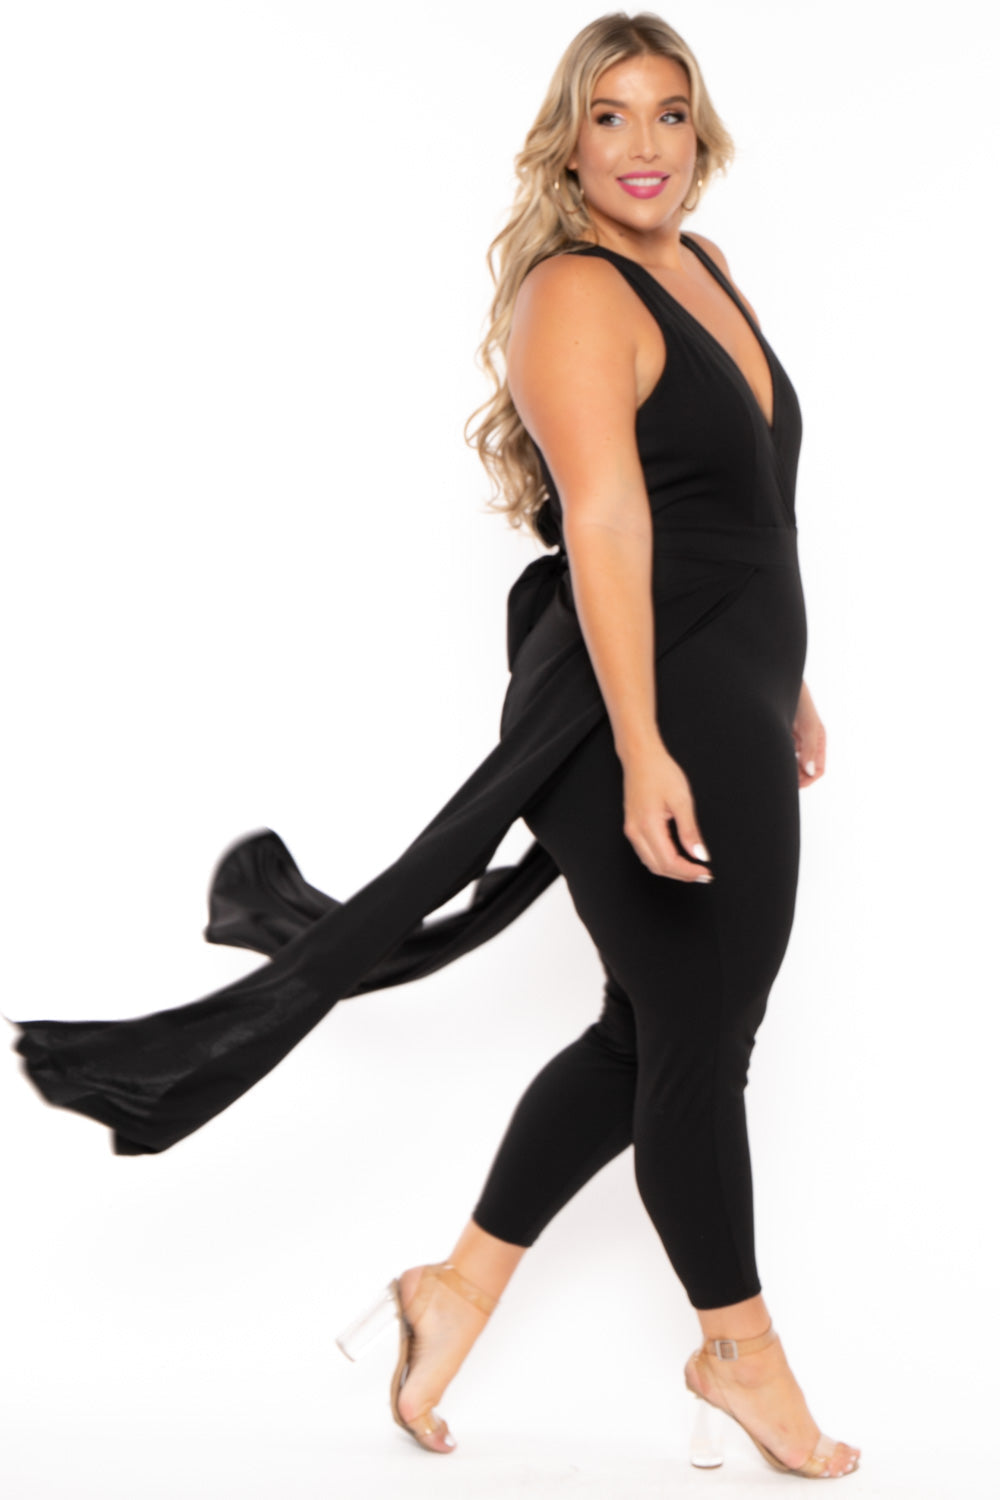 Curvy Sense Jumpsuits and Rompers Plus Size Angelina Overlay Jumpsuit- Black